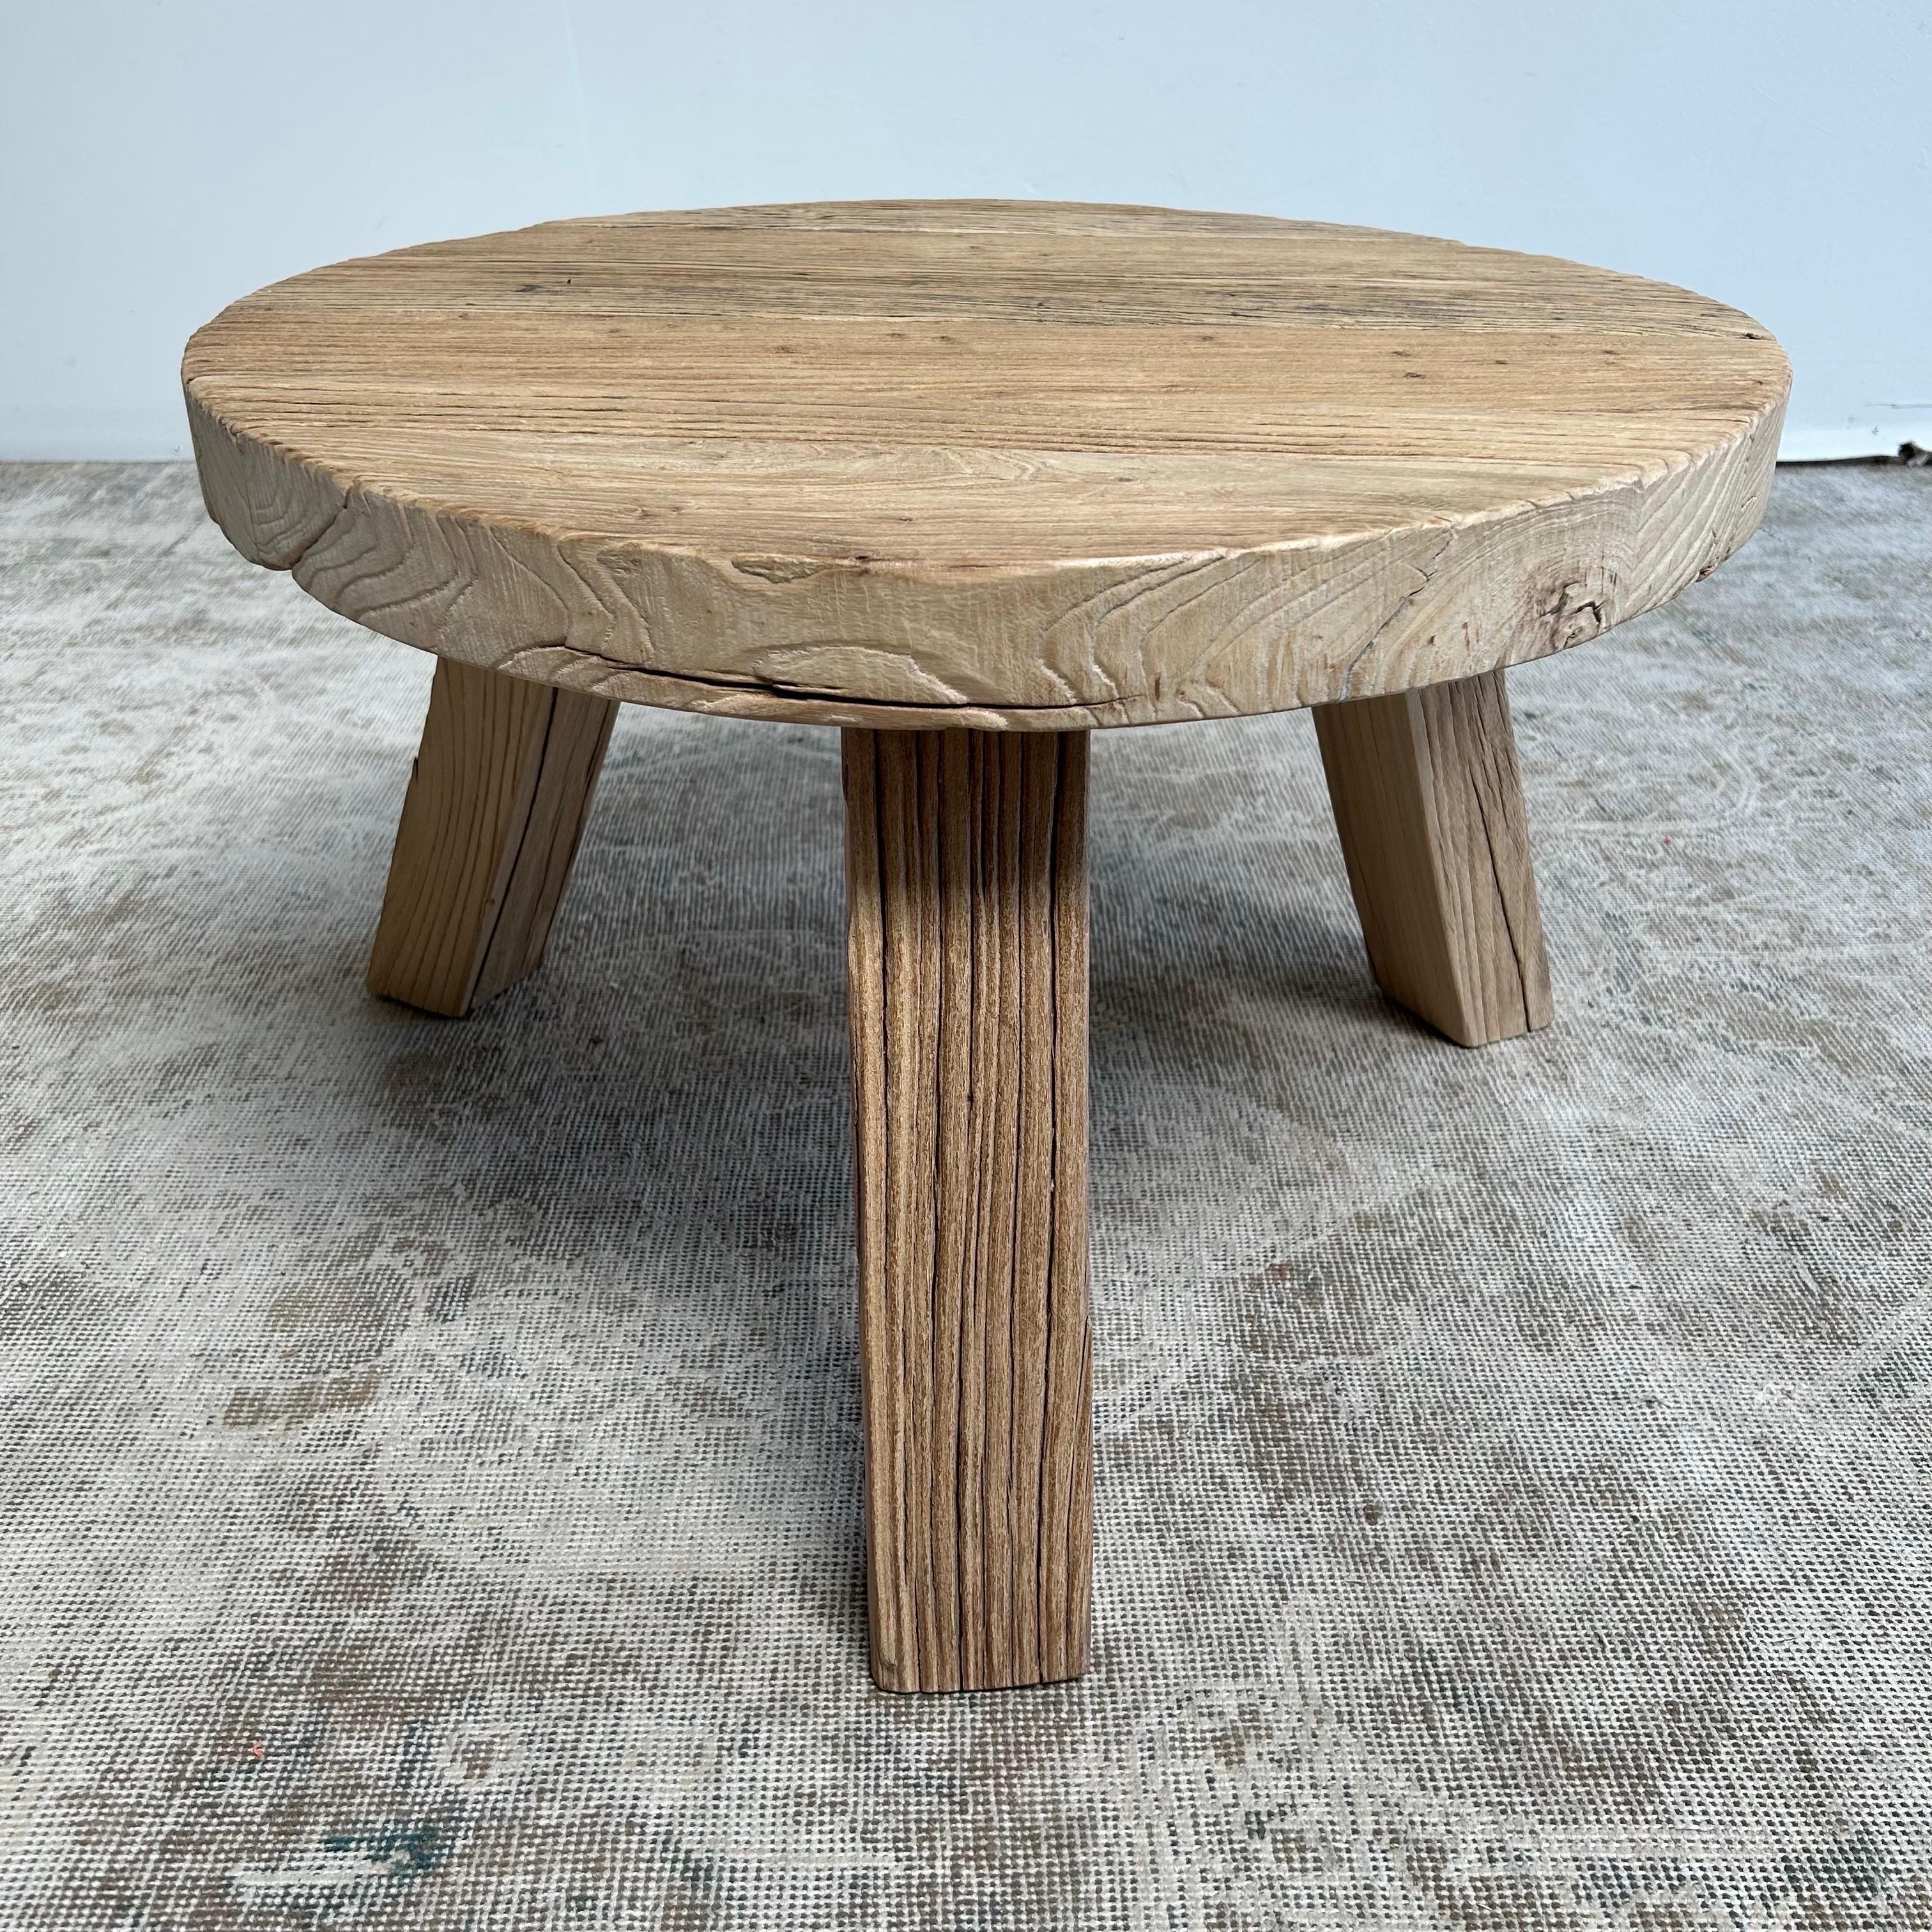 Custom made by bloom home inc elm wood round coffee table with approximately 2? thick top. Solid elm table is heavy, sturdy, ready for everyday use. Medium elm wood waxed finish. We currenlty have these in stock please view quantity availability